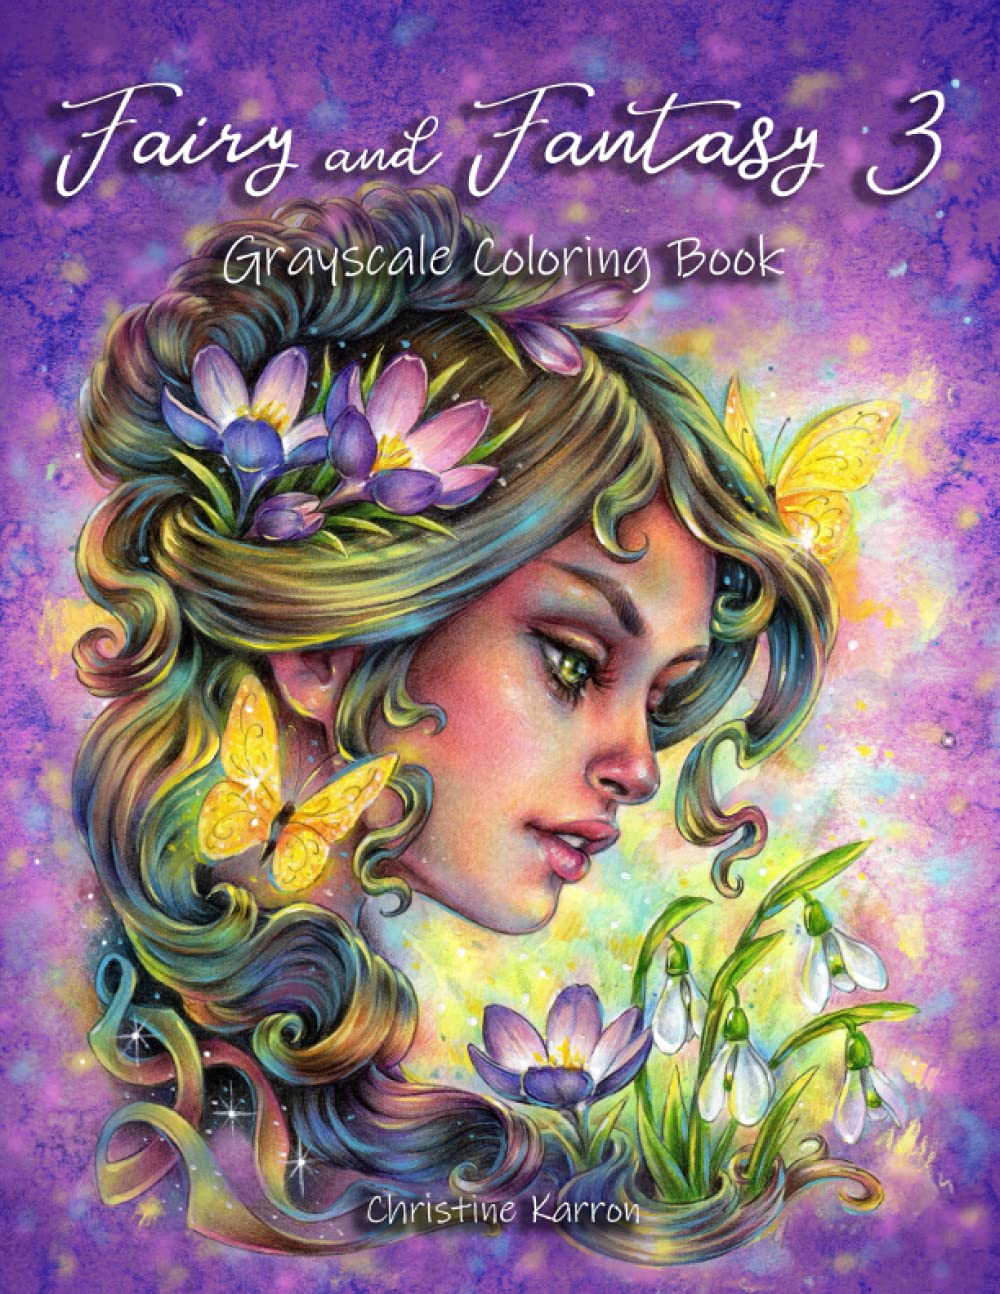 Fairy and Fantasy 3 Grayscale Coloringbook (Paperback)